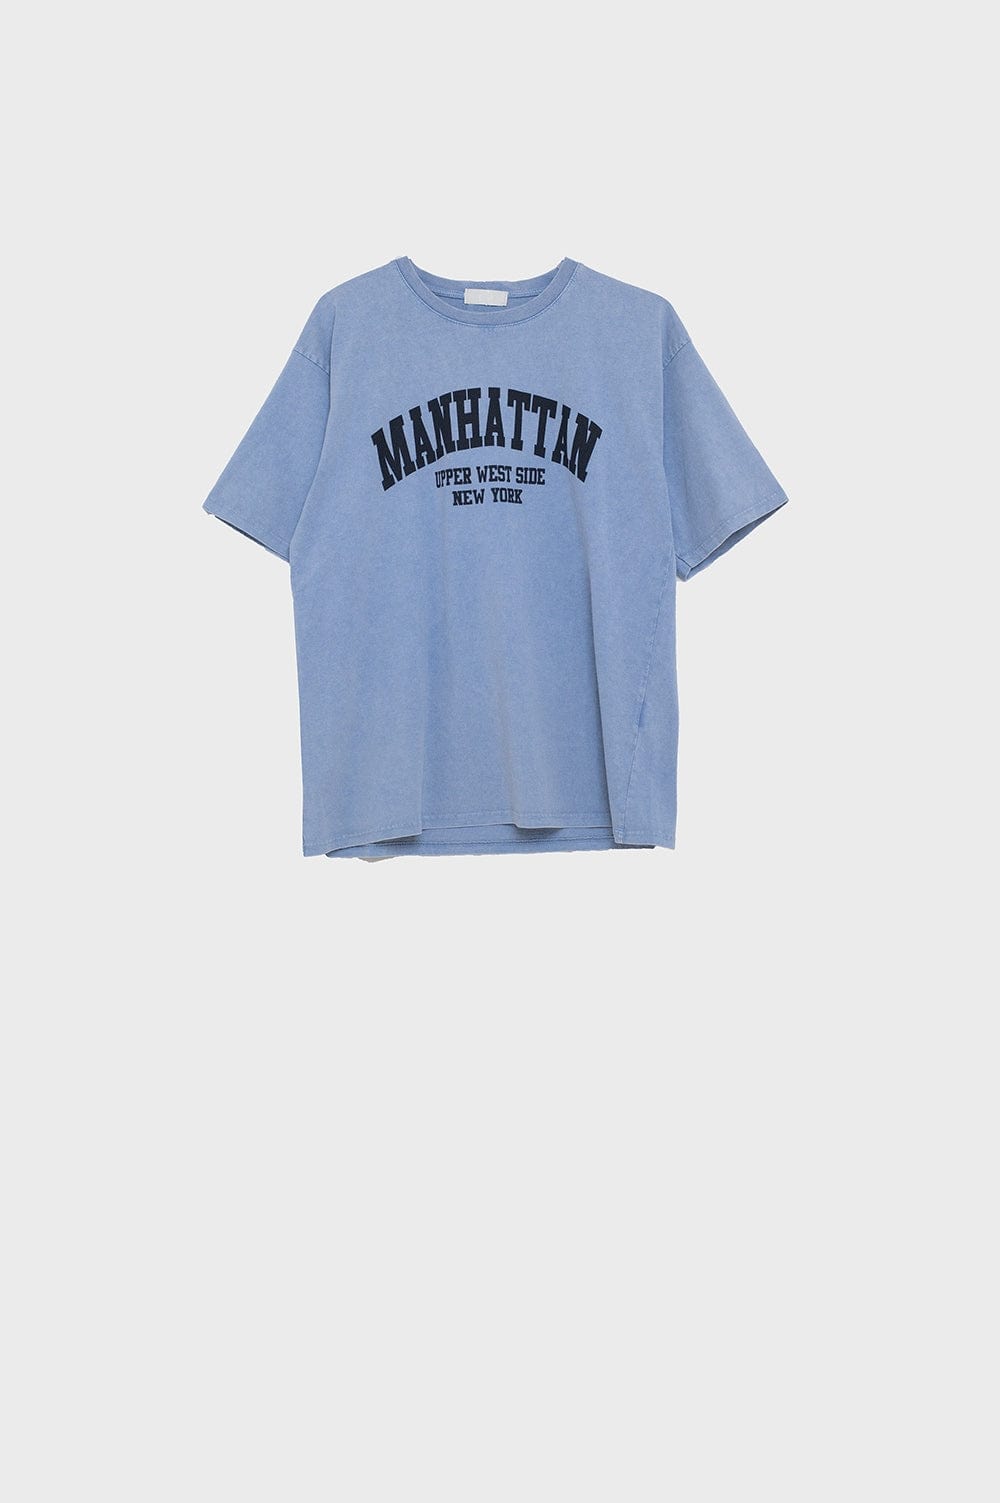 Q2 Women's Tees & Tanks One Size / Blue Blue Relaxed T-Shirt With Manhattan Text